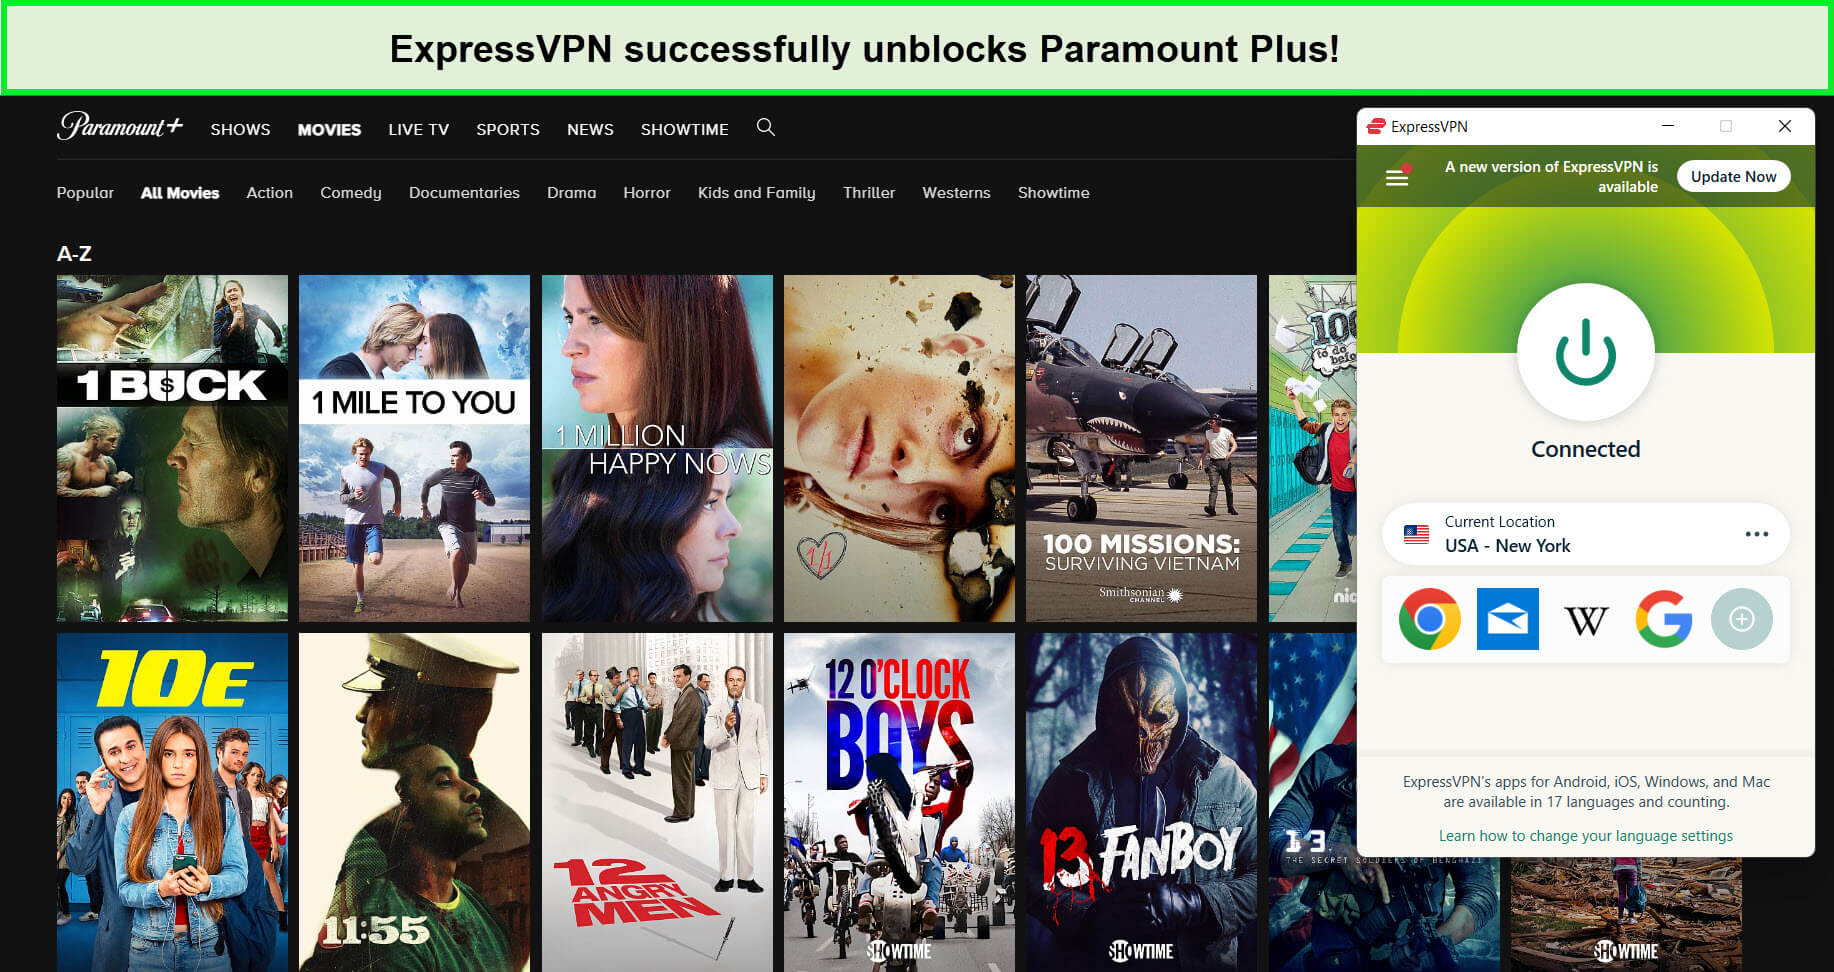 expressvpn-unblocks-paramount-plus-for-teen-wolf-the-movie-outside-USA